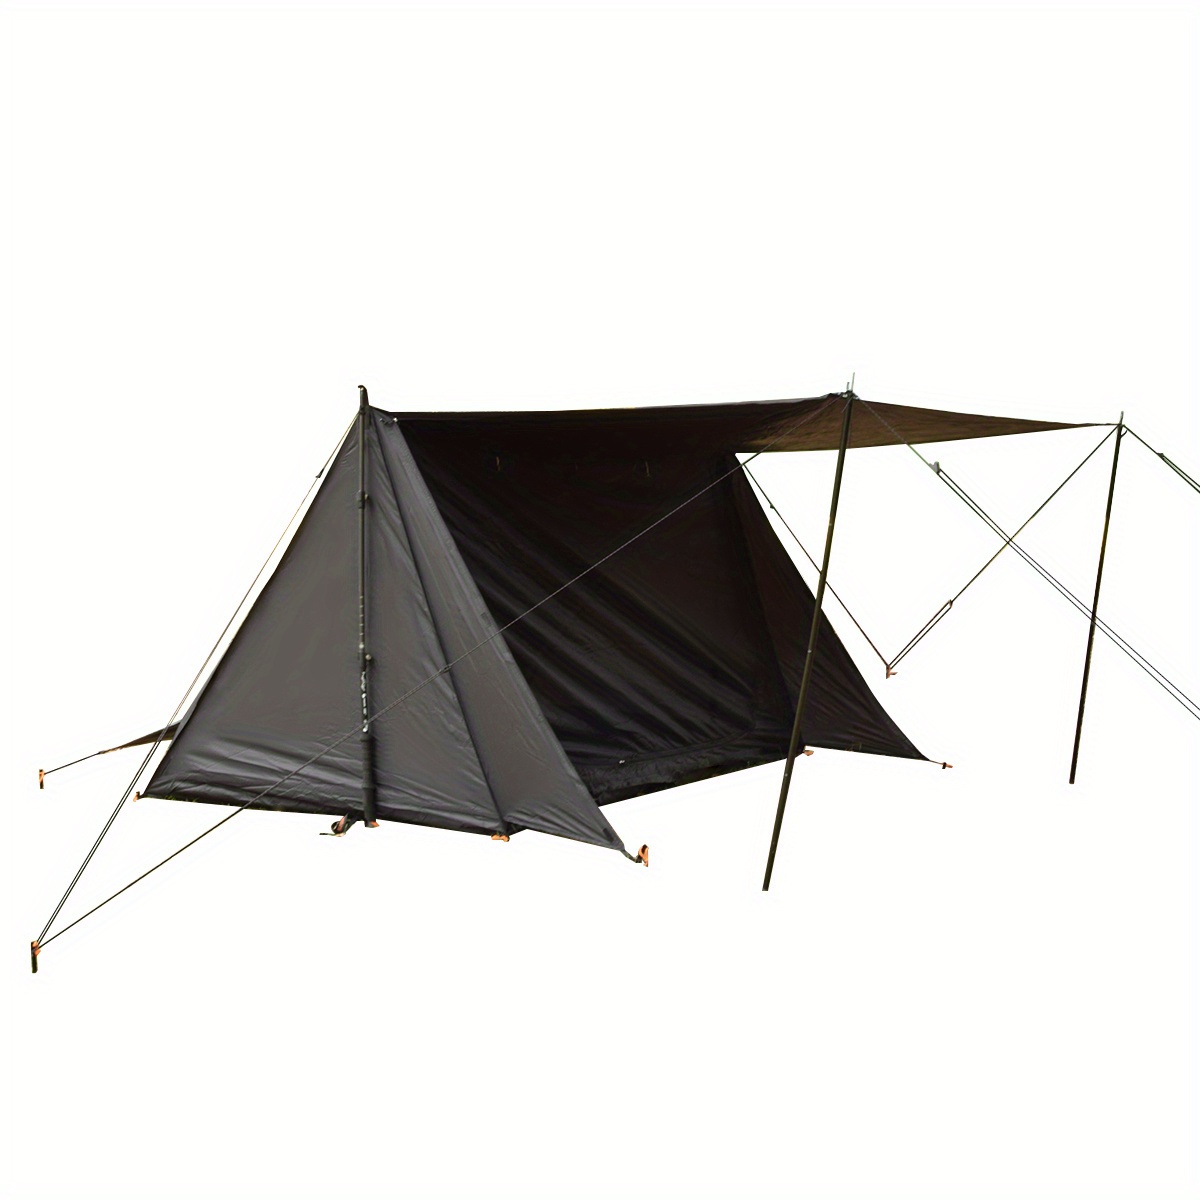 Ultralight Bushcraft Shelter, Waterproof Backpacking Tent With